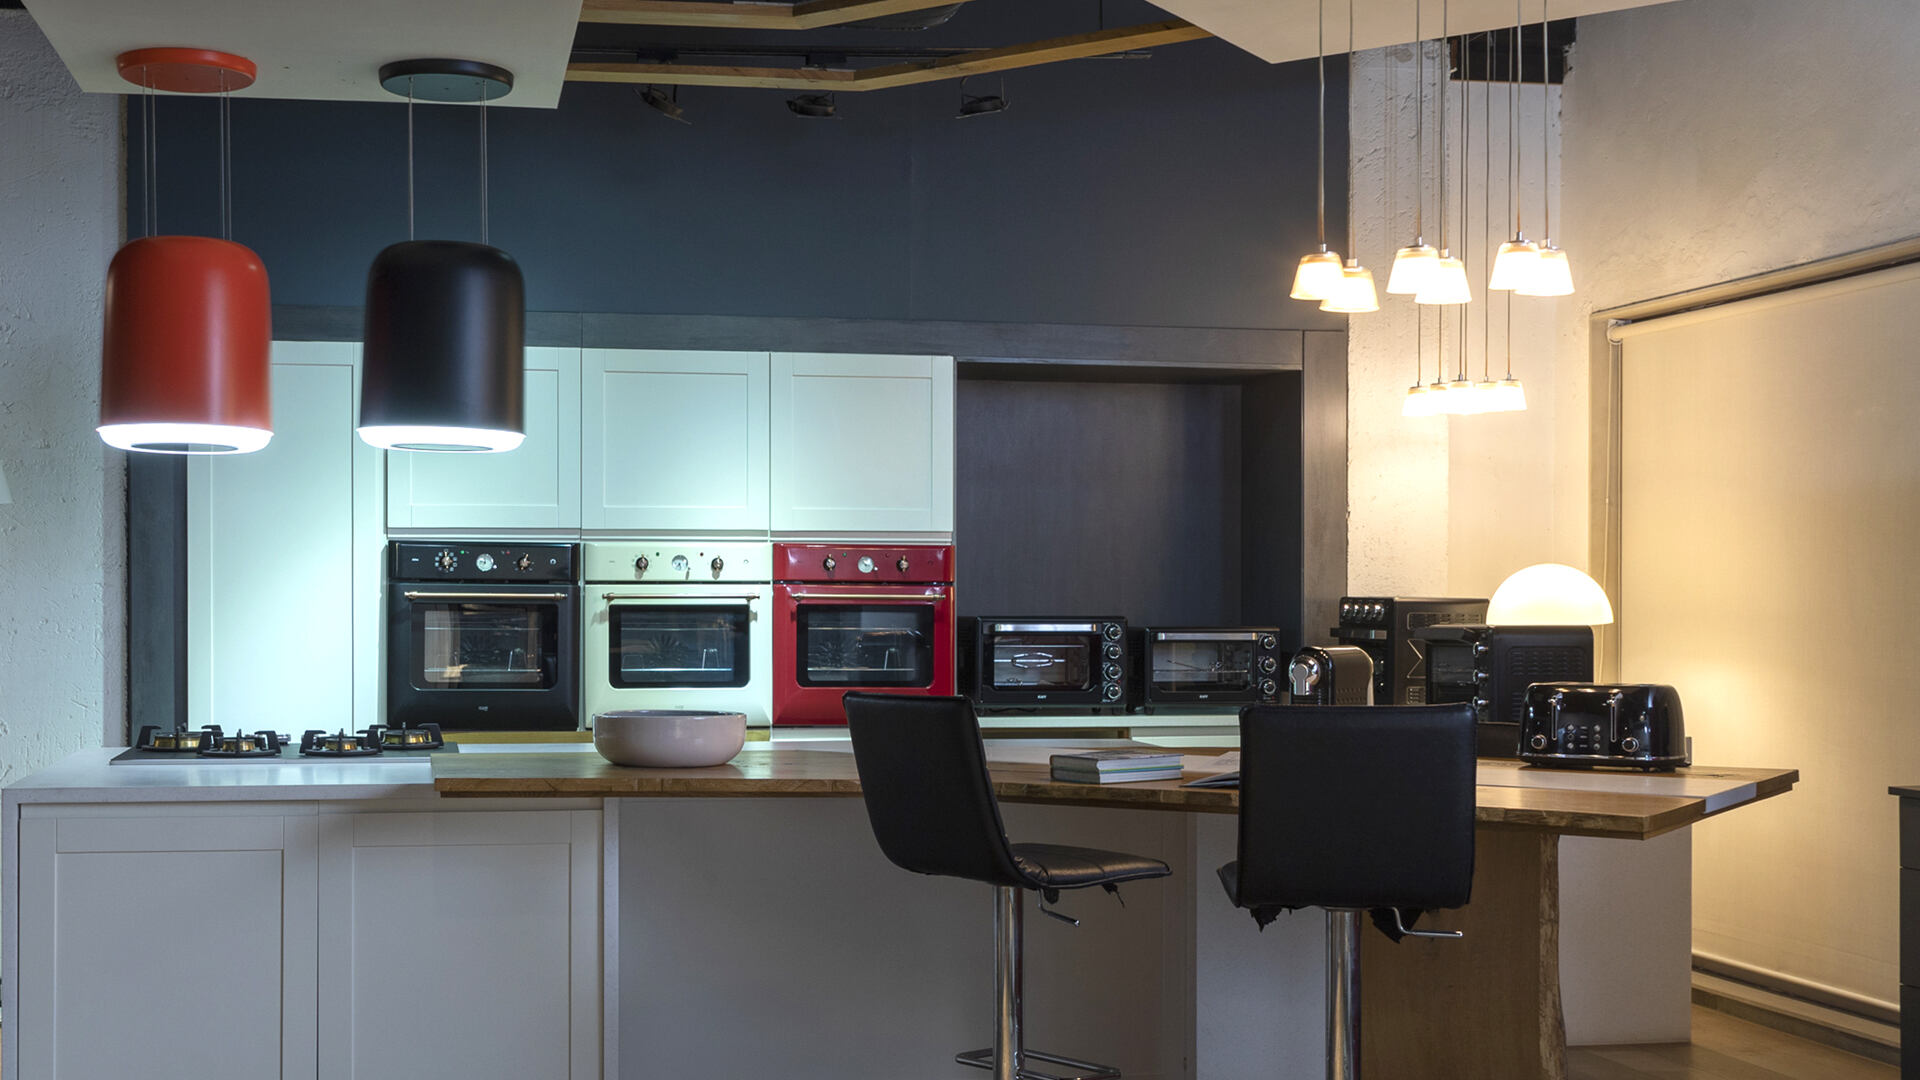 Revolutionary KAFF appliances: Reshaping comfort & sophistication with unparalleled ingenuity